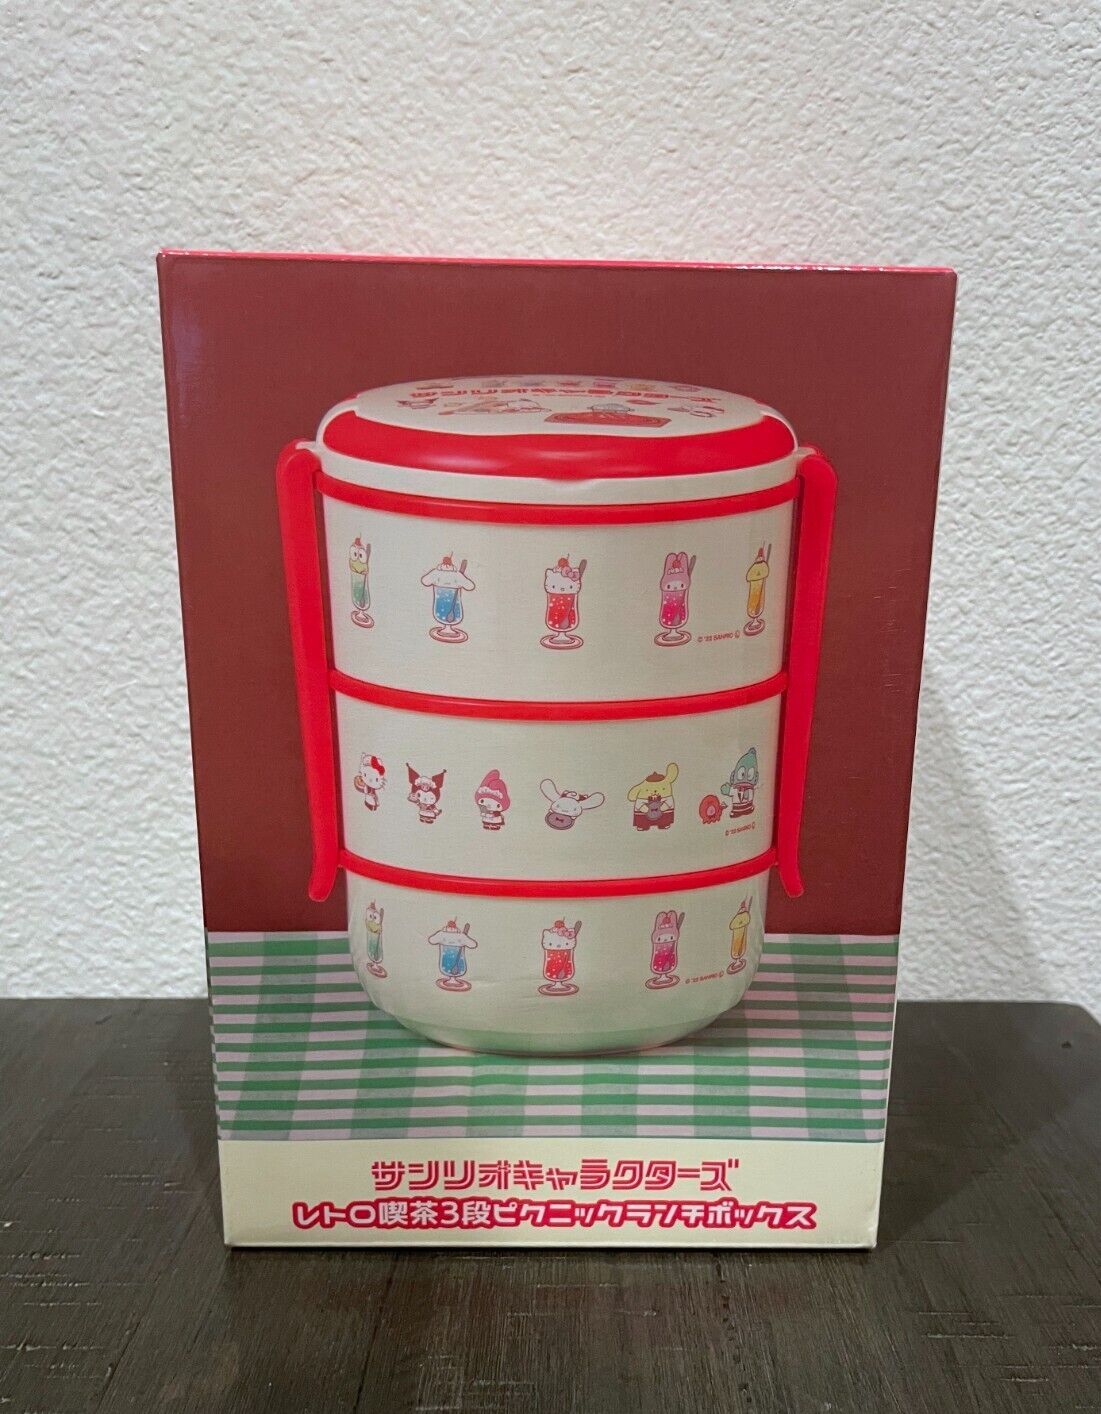 NEW Sanrio Characters Retro Cafe 3-Level Picnic Bento Lunch Box from Japan